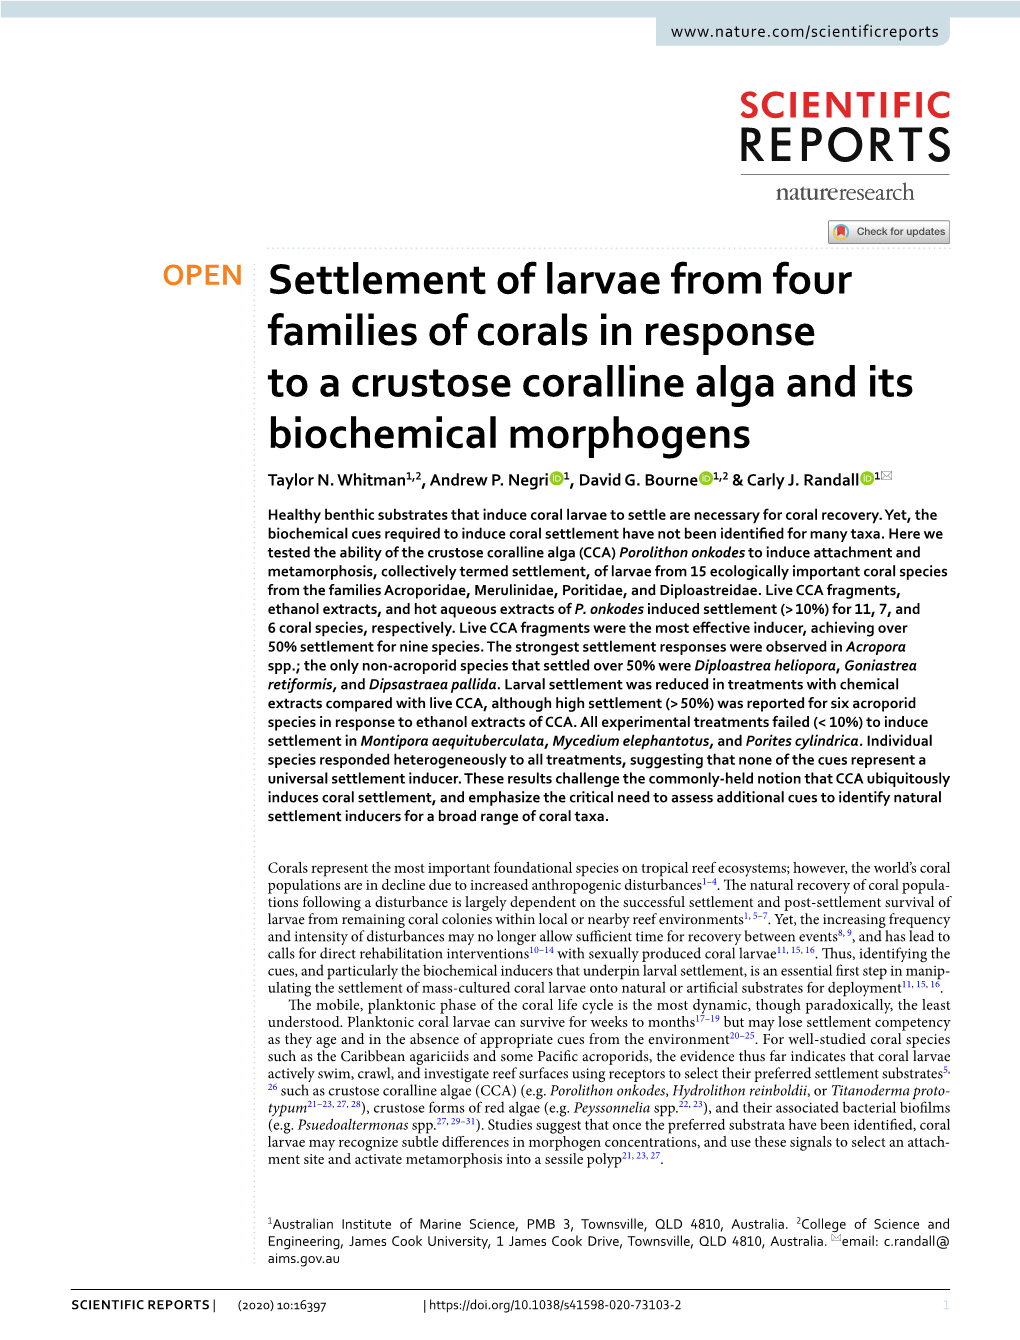 Settlement of Larvae from Four Families of Corals in Response to a Crustose Coralline Alga and Its Biochemical Morphogens Taylor N